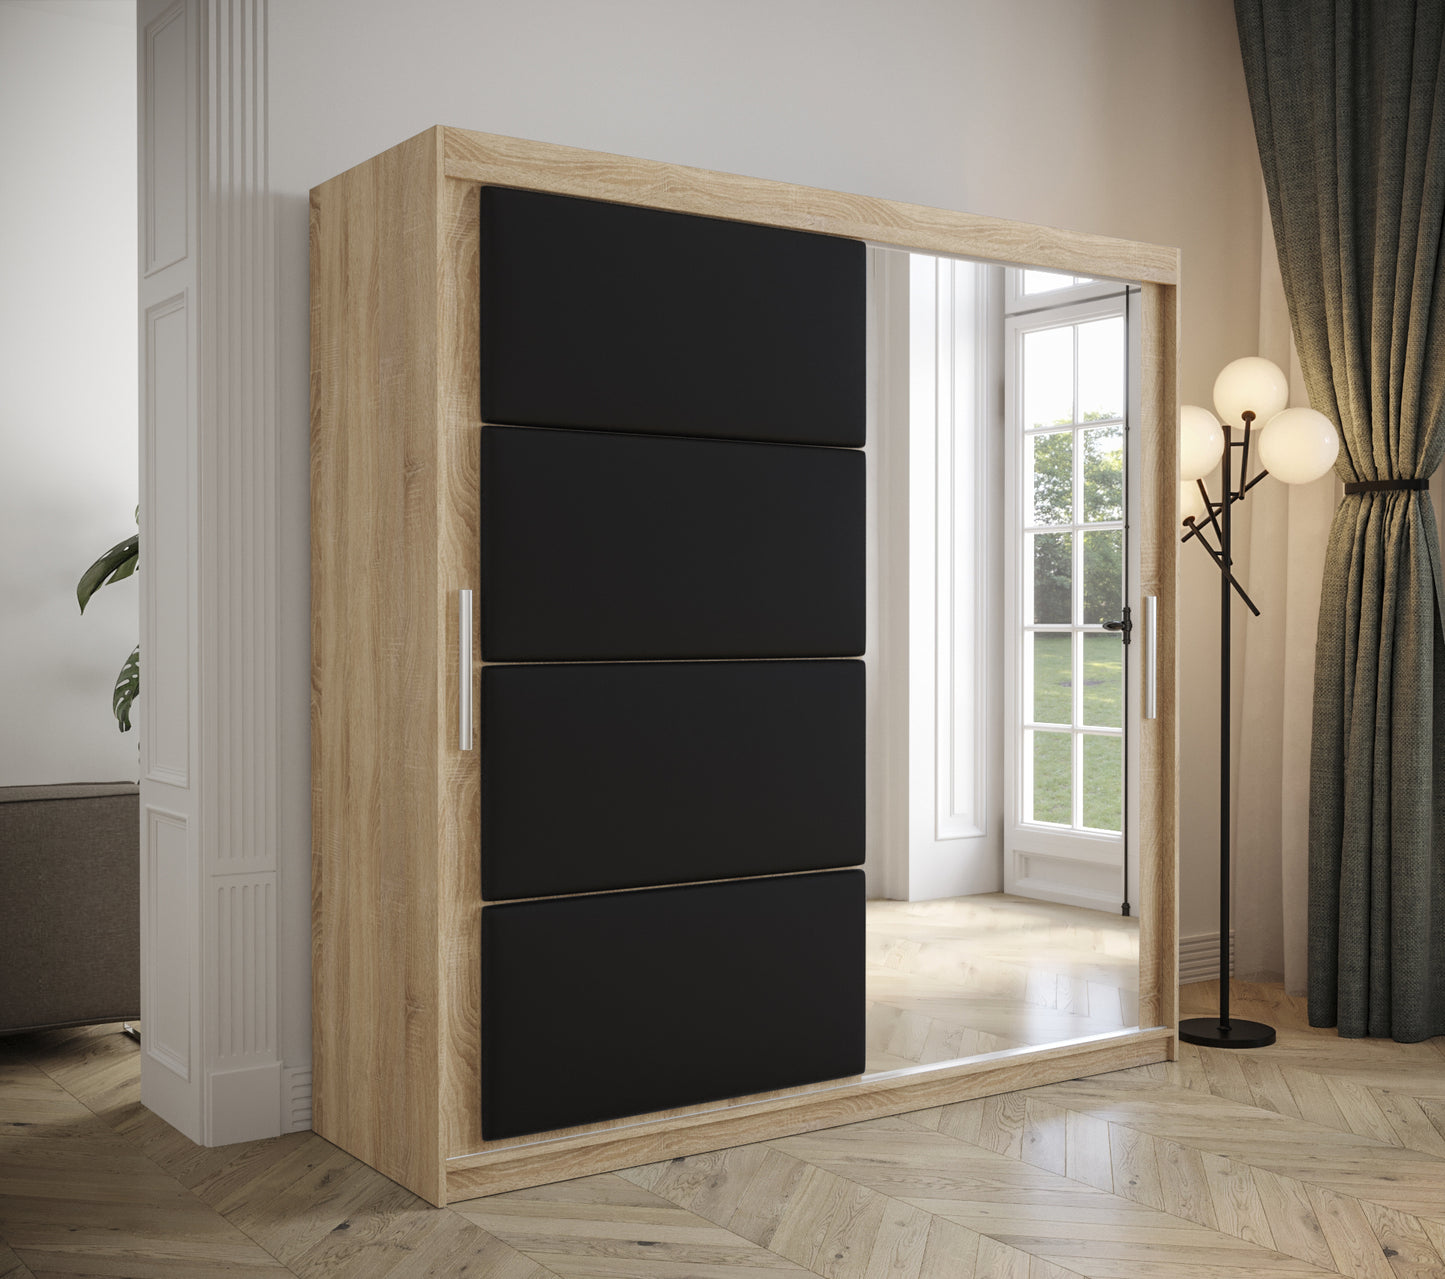 TAPPY - Wardrobe Mirror 2 Colours 7 Colours Upholstered Front Panels Drawers Optional >200cm x 200cm<